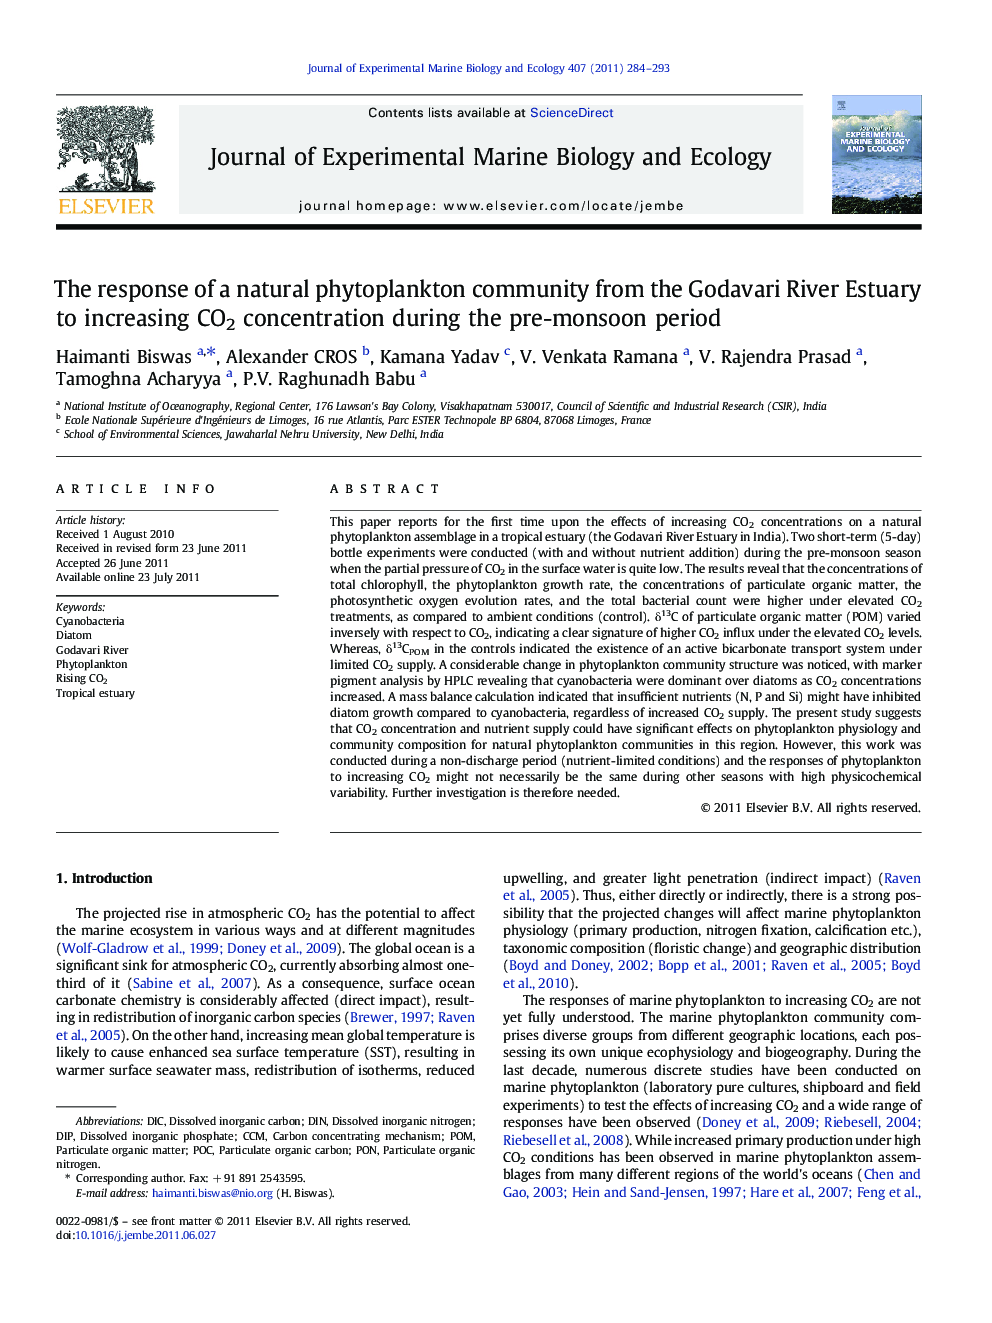 The response of a natural phytoplankton community from the Godavari River Estuary to increasing CO2 concentration during the pre-monsoon period